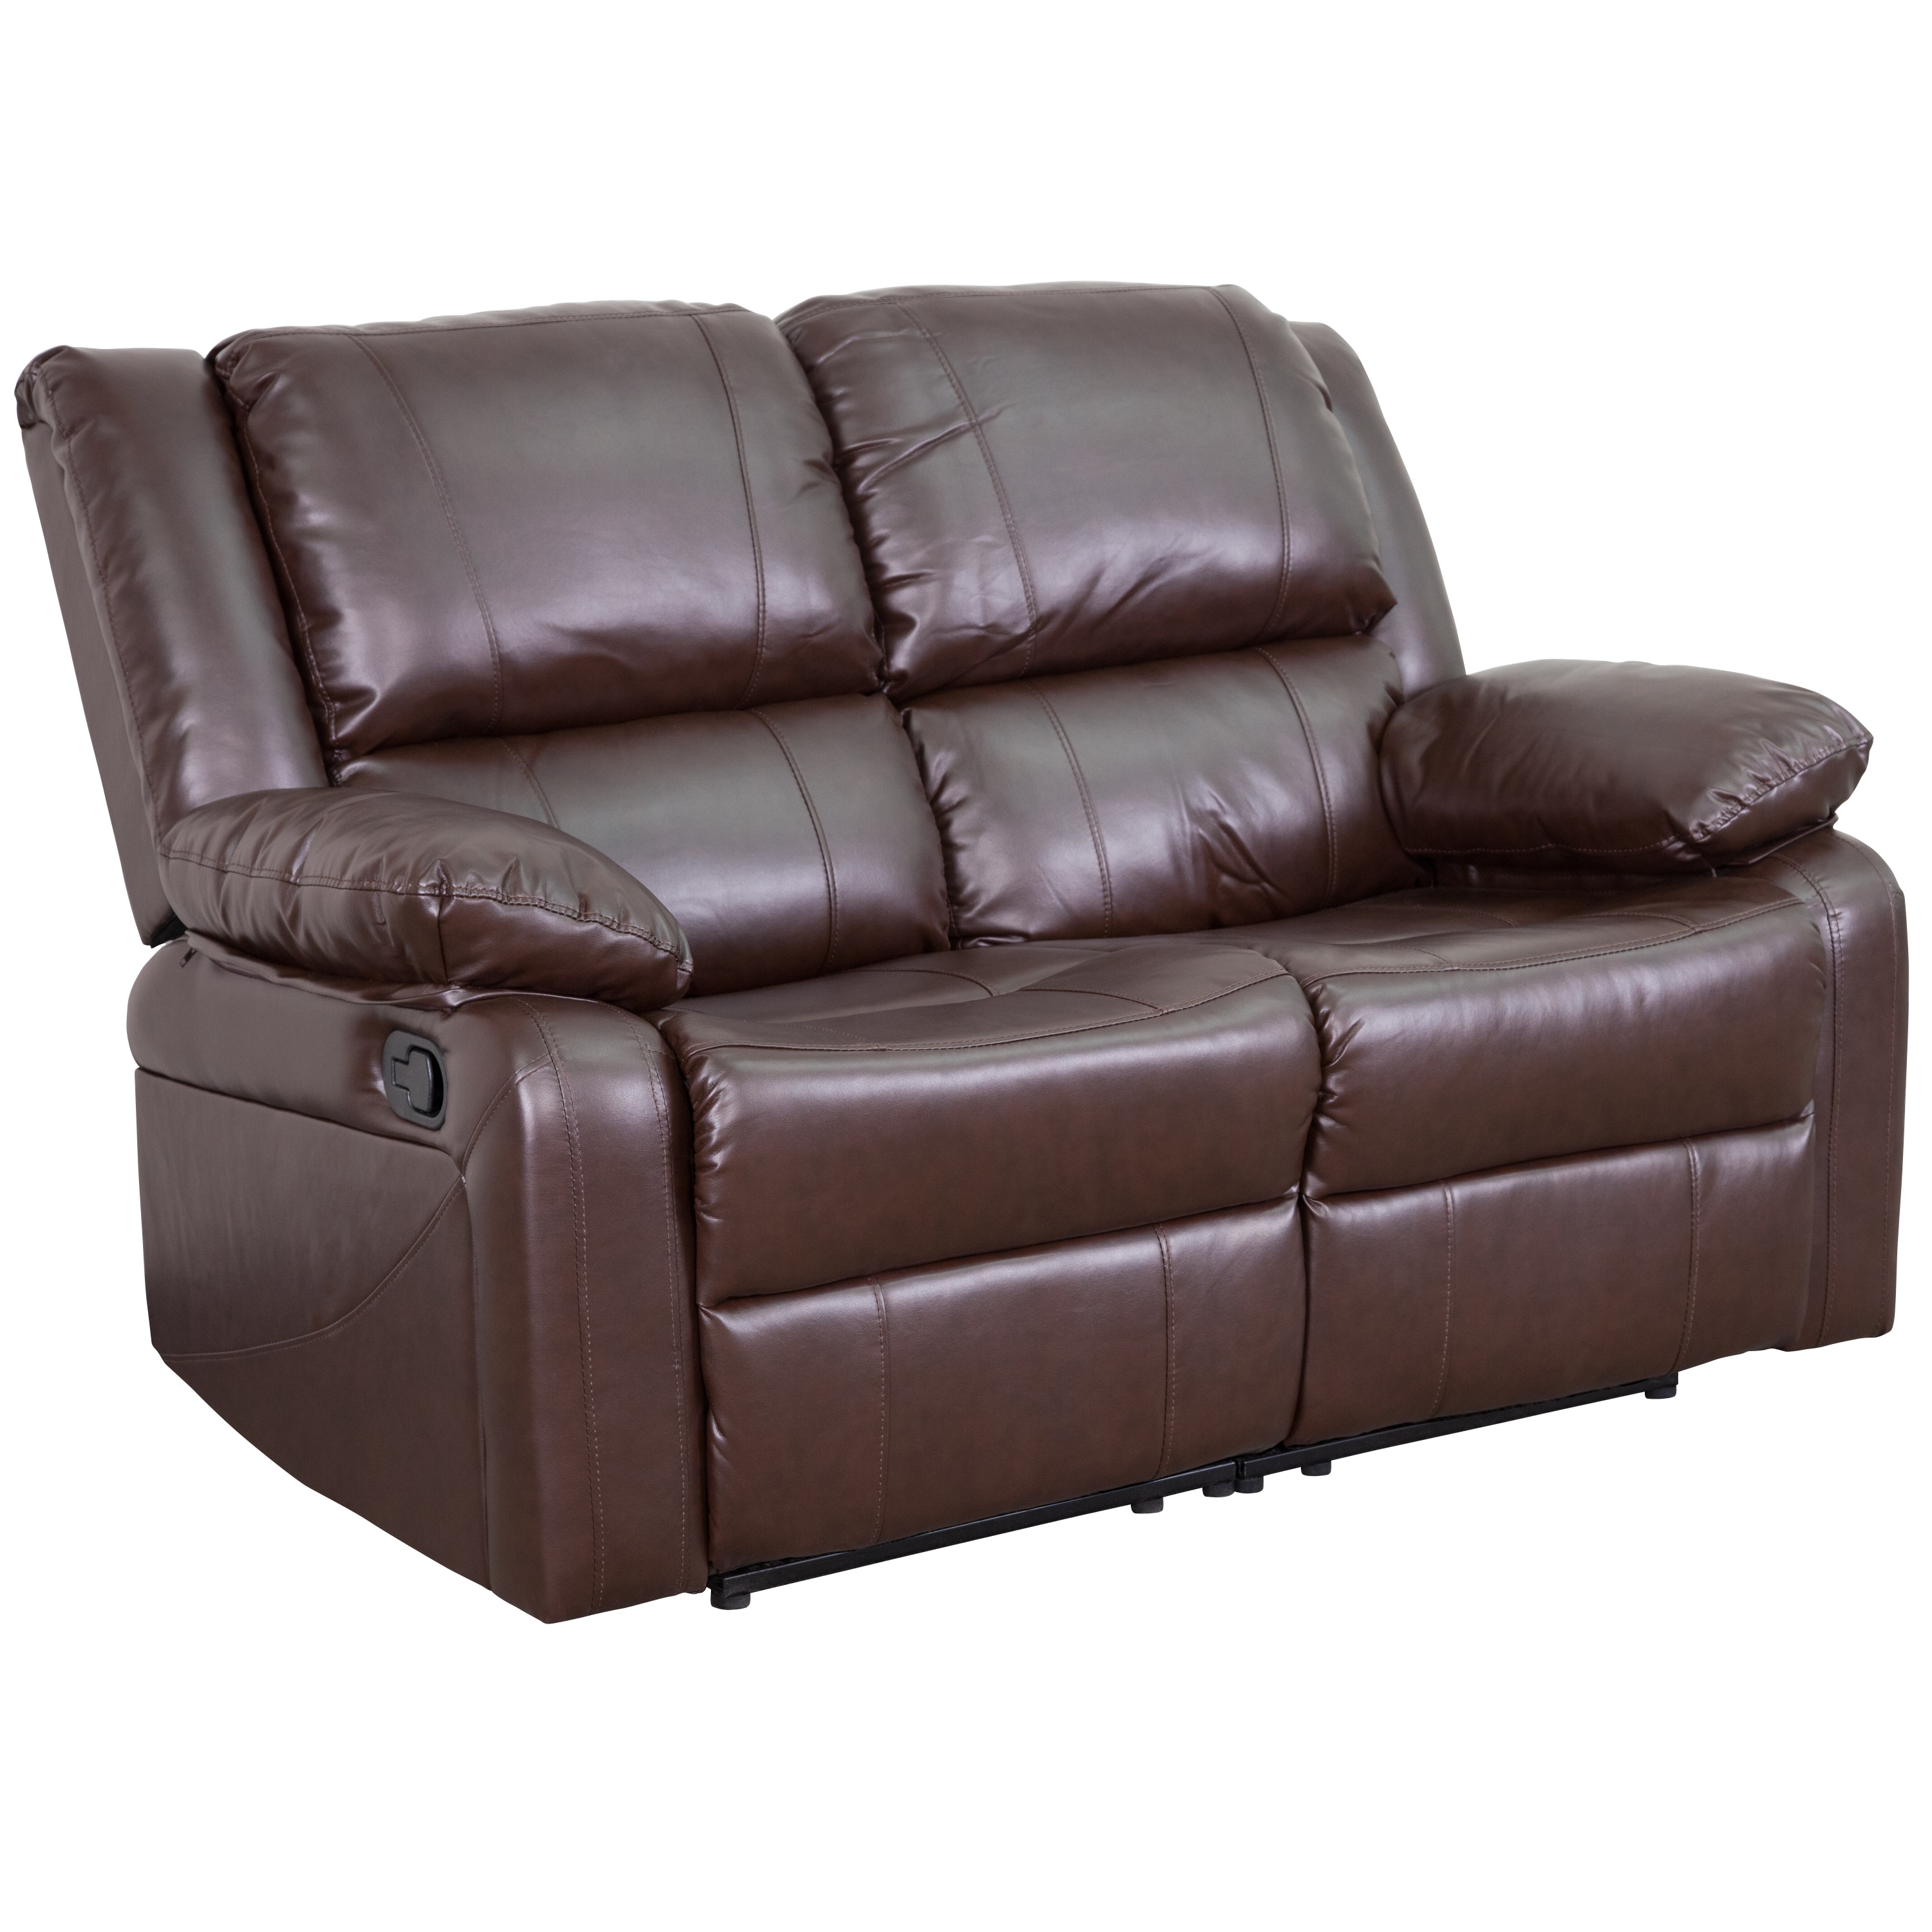 Faux Leather Reclining Loveseat, Leather Recliner Love Seat